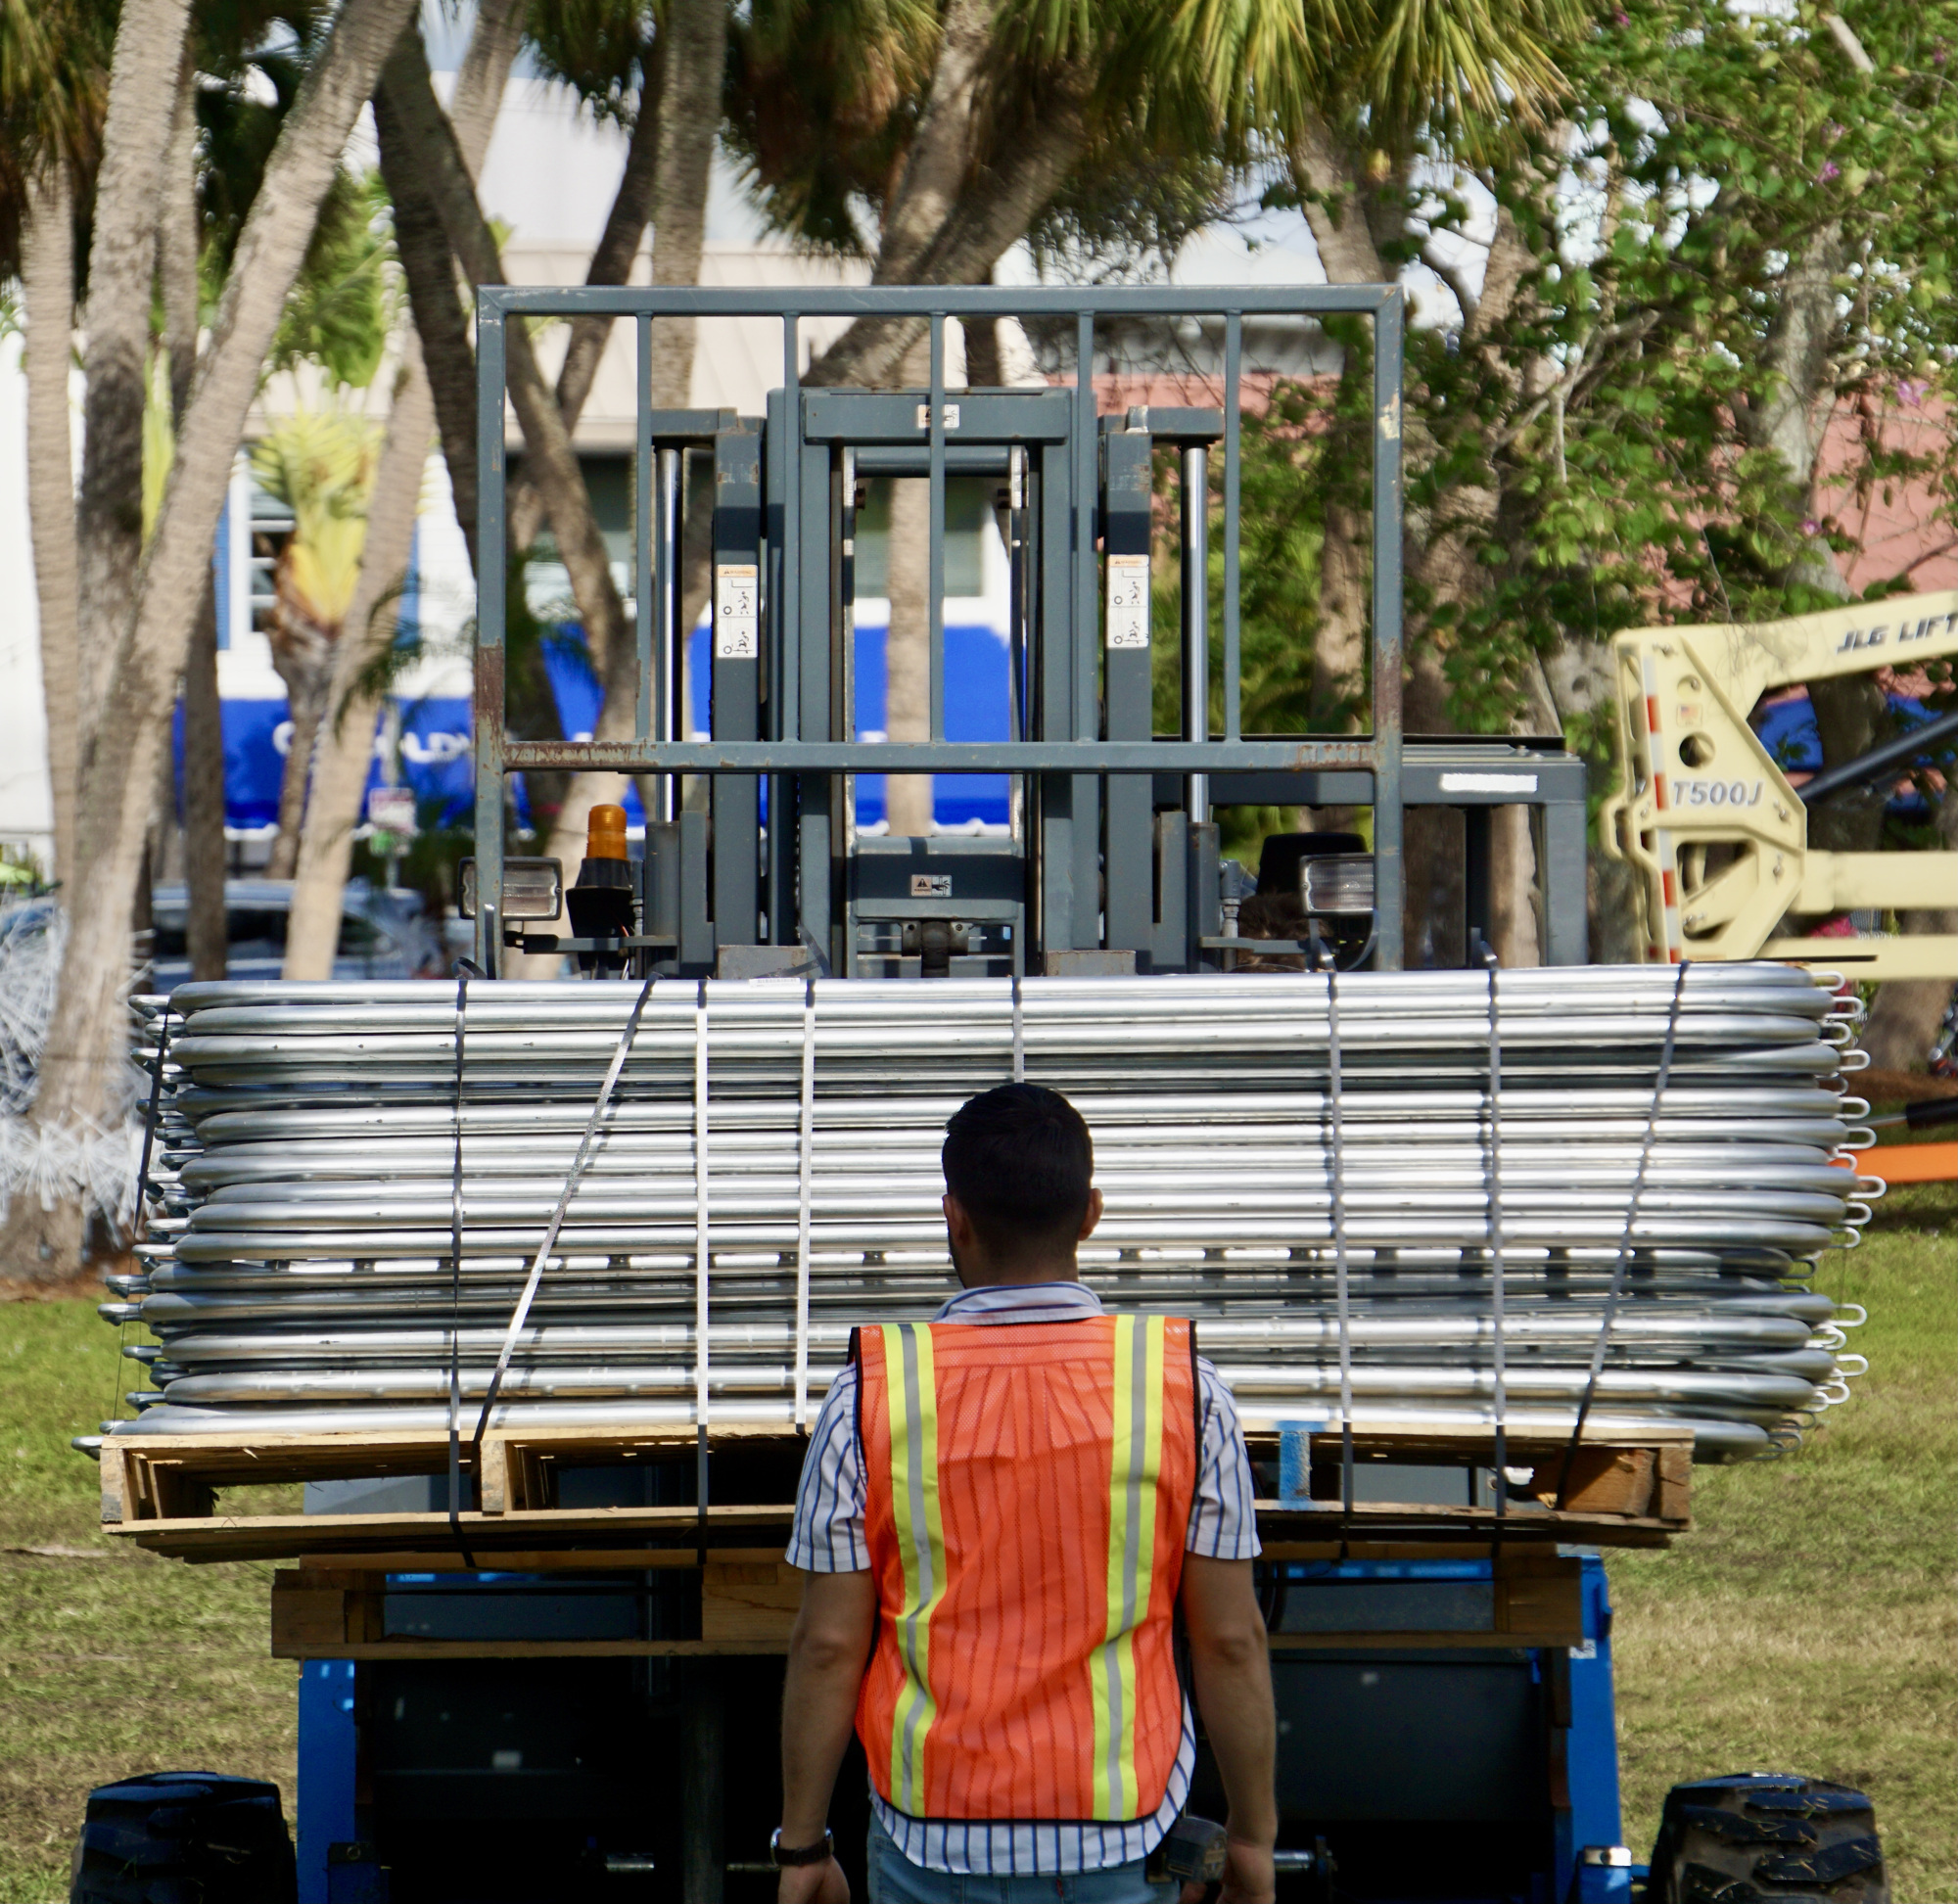 Work crews were preparing the park in St. Armands Circle on Monday for Friday's opening of the Winter Festival. (Eric Garwood)